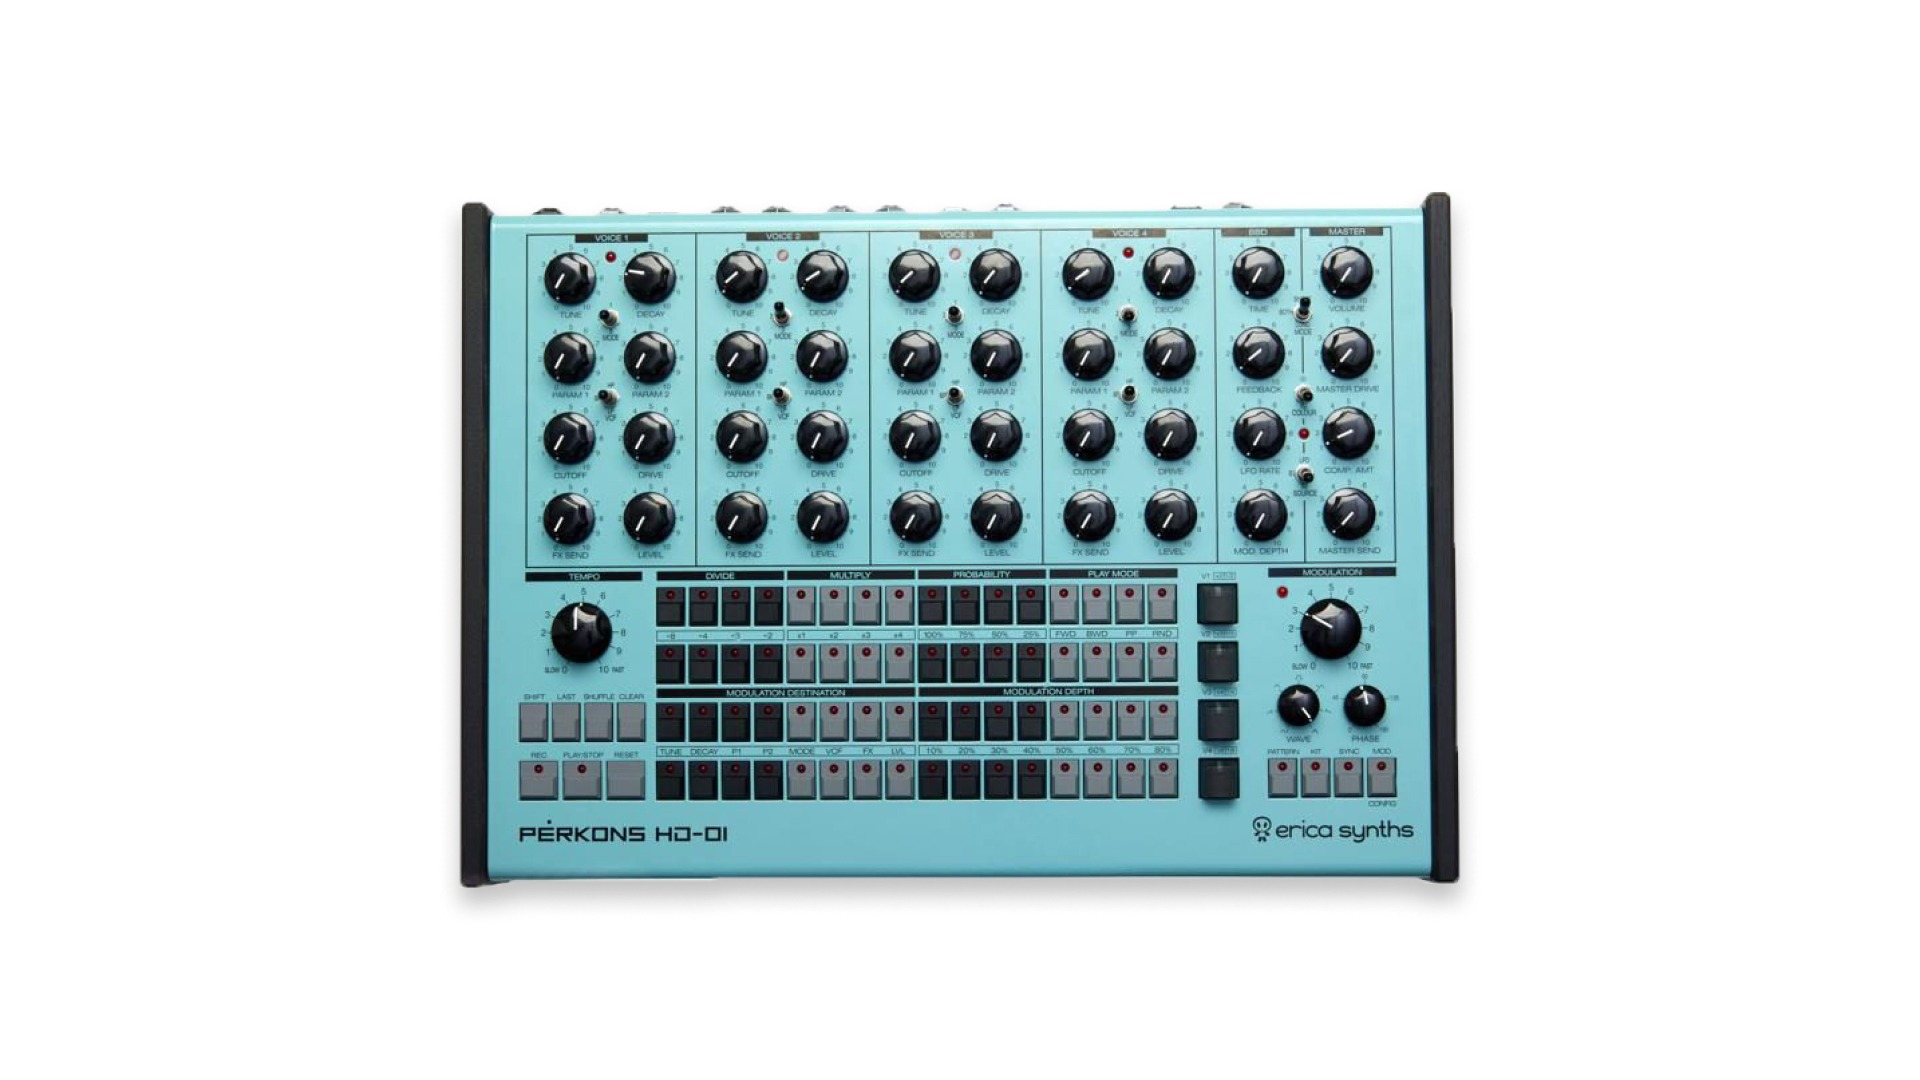 erica synths perkons hd-01